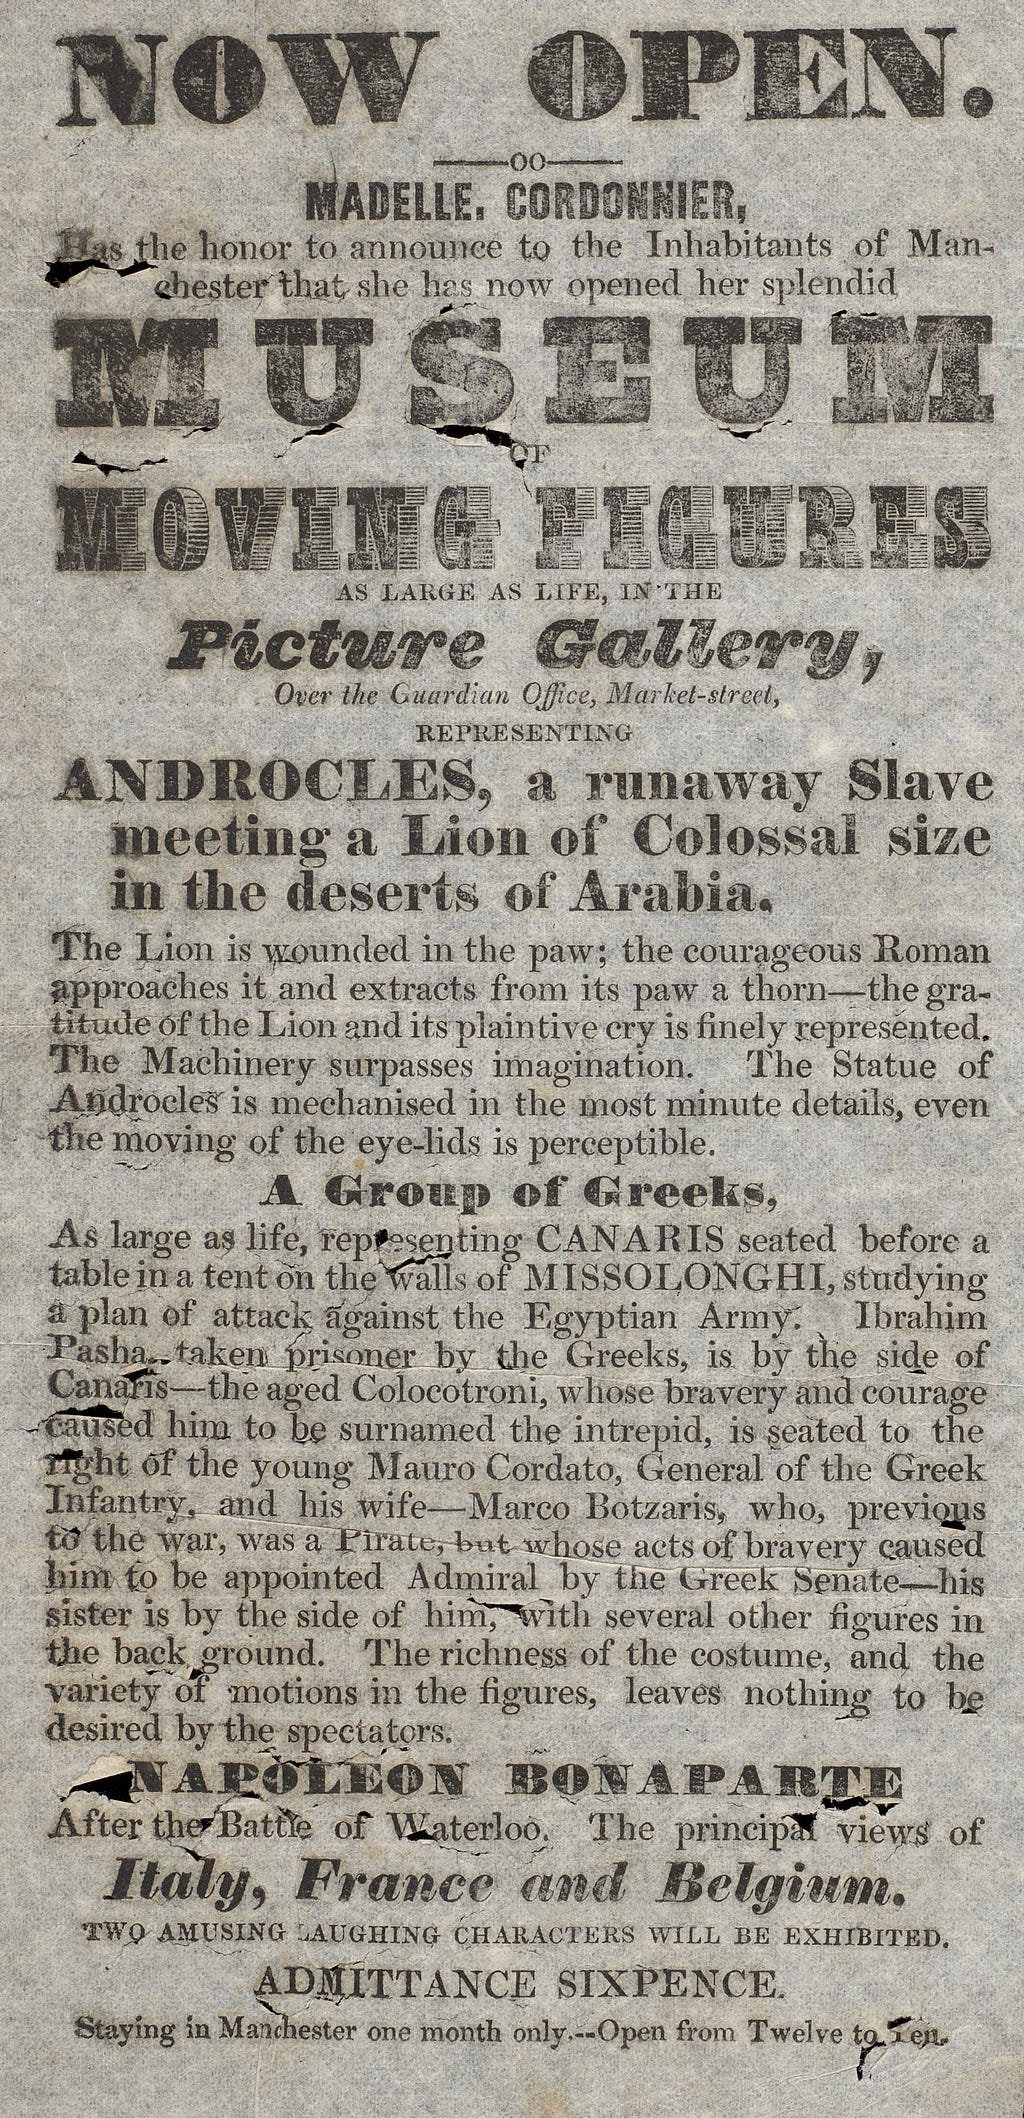 1839 Manchester handbill advertising a display of automata, including Androcles and the lion, a group of Greeks and Napoleon.